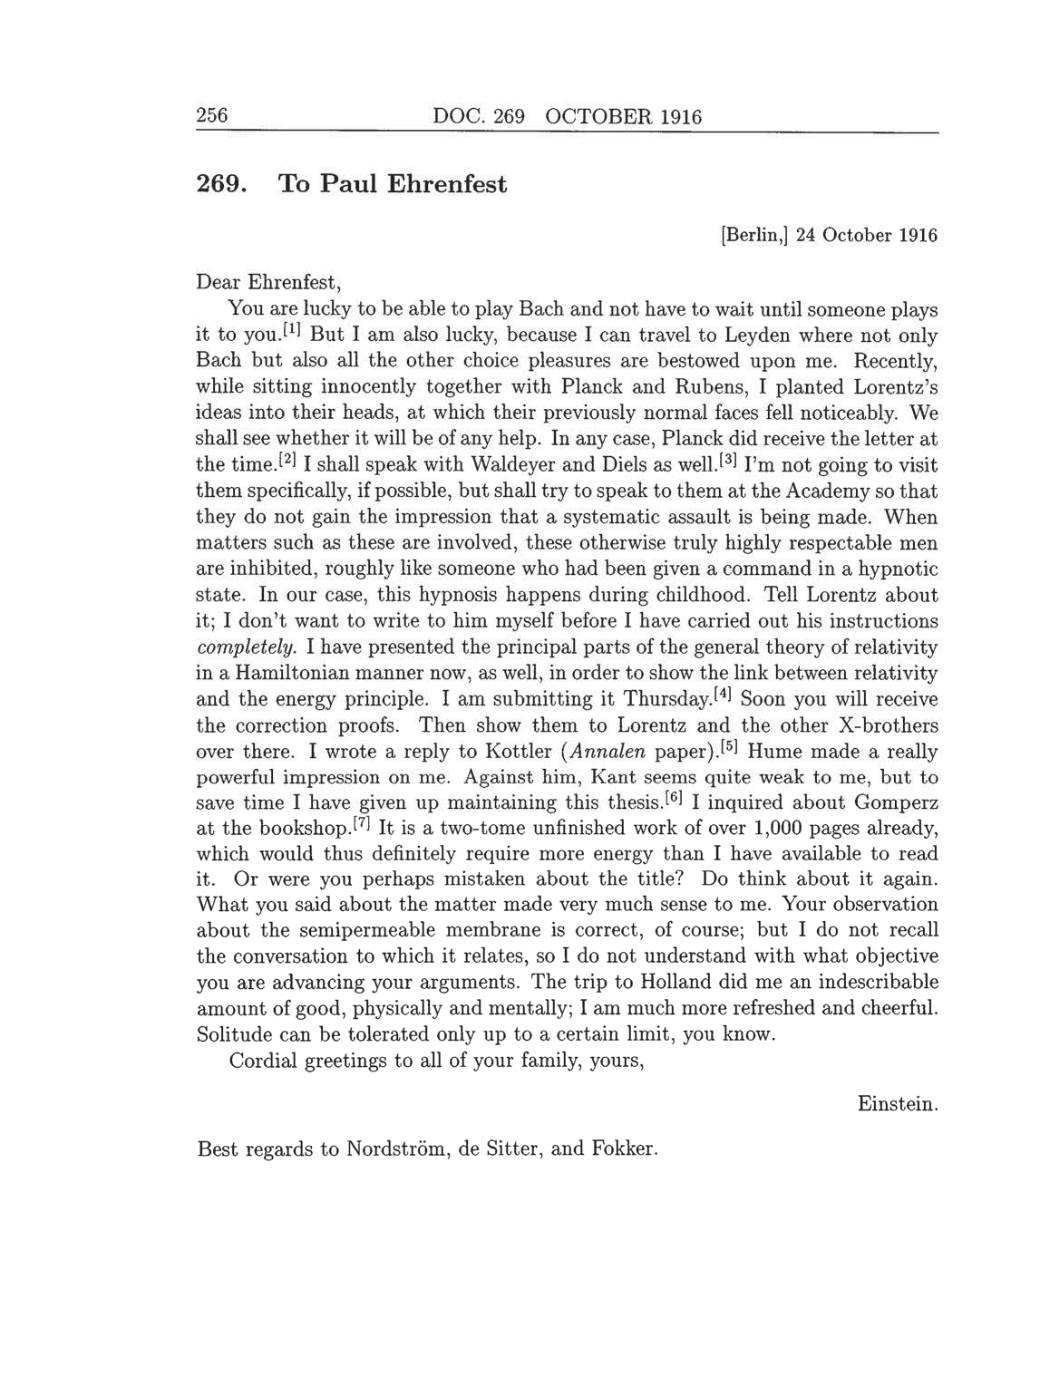 Volume 8: The Berlin Years: Correspondence, 1914-1918 (English translation supplement) page 256